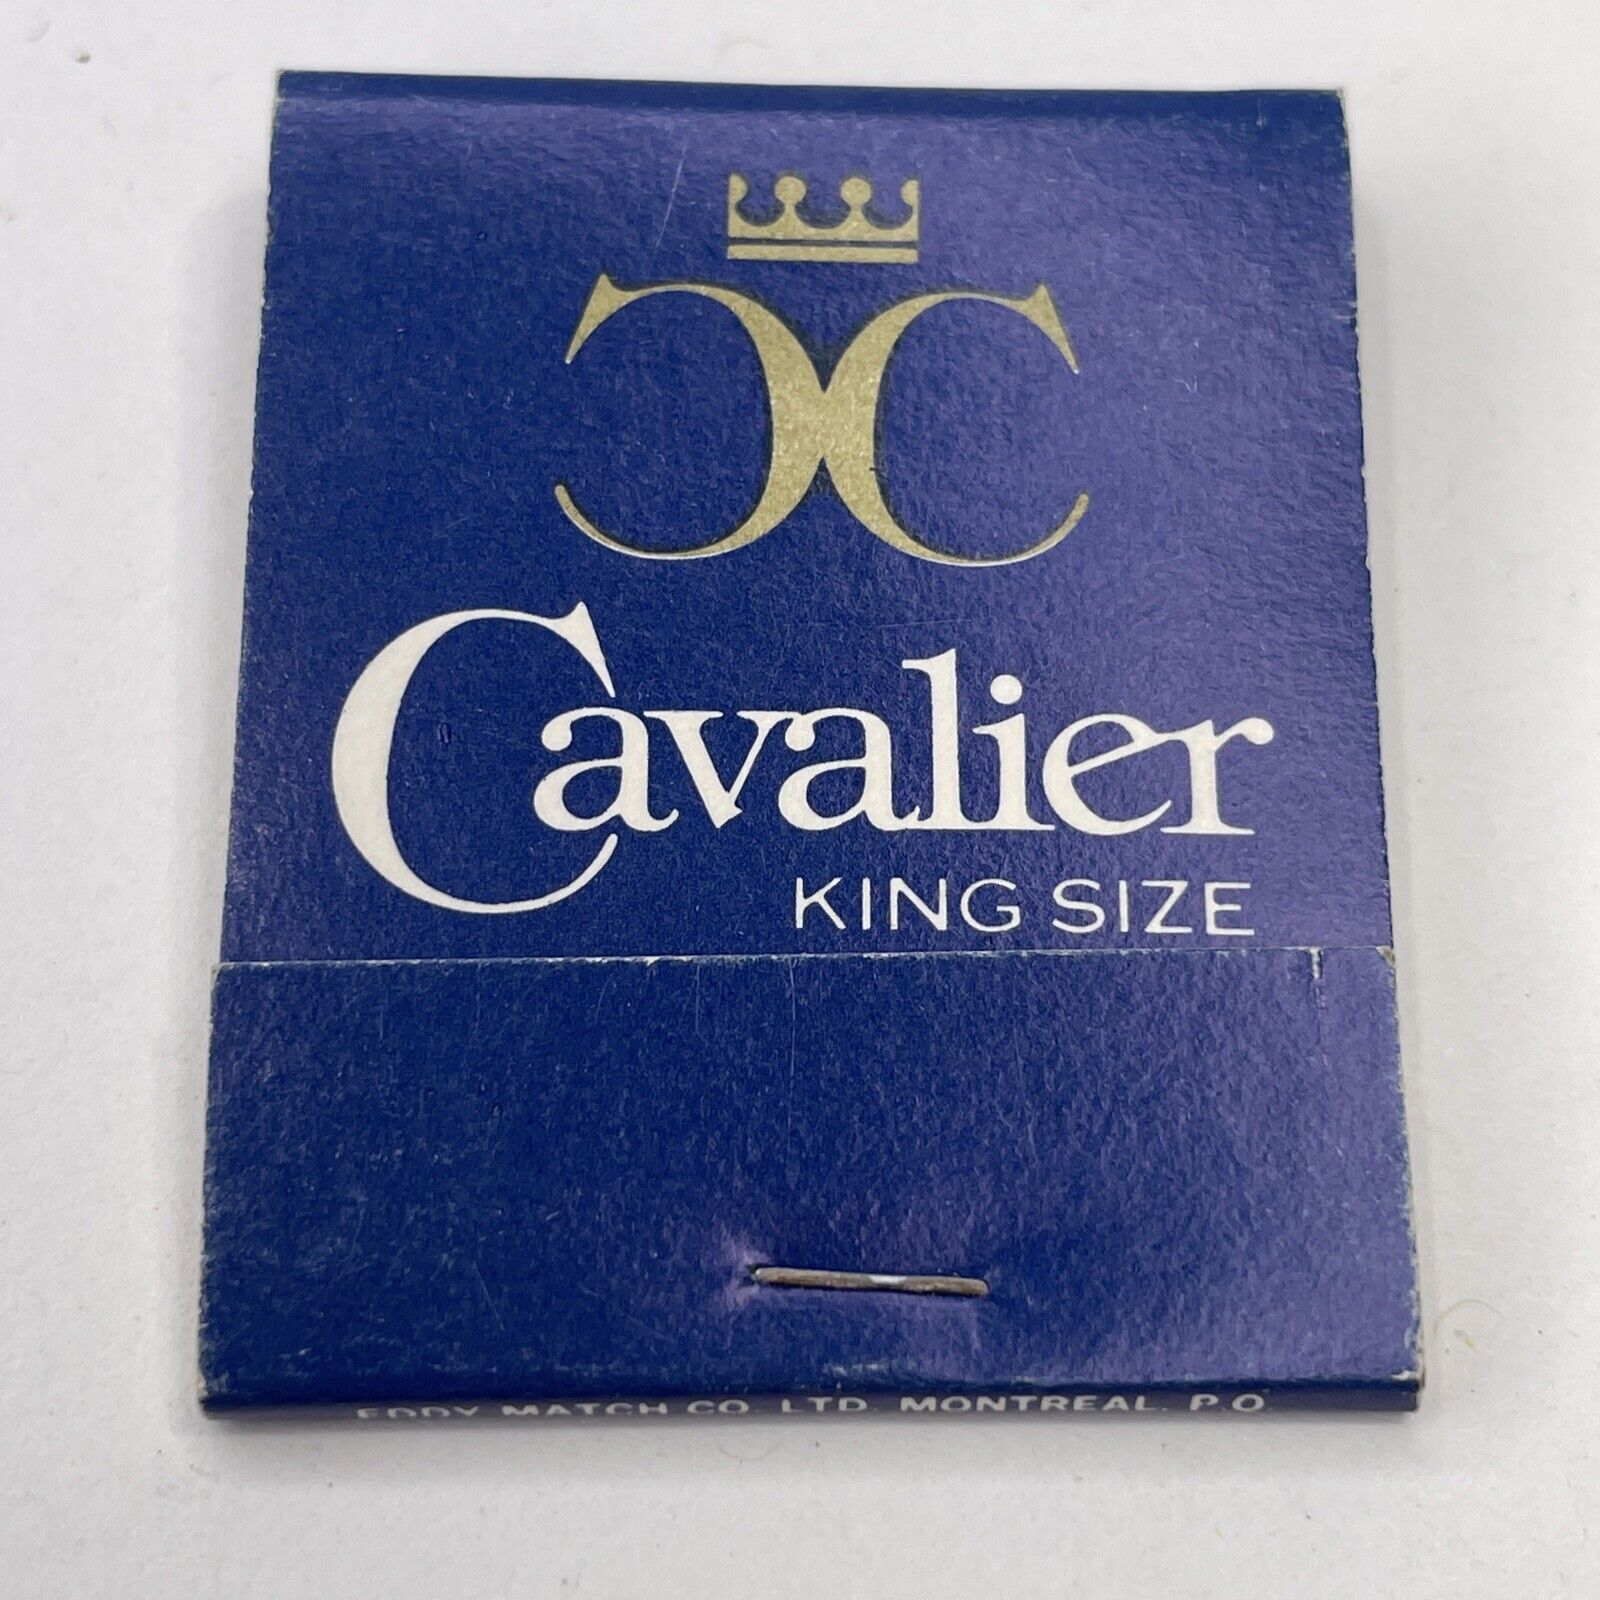 Vintage 1980’s Cavalier King Size Book of Matches Matchbook